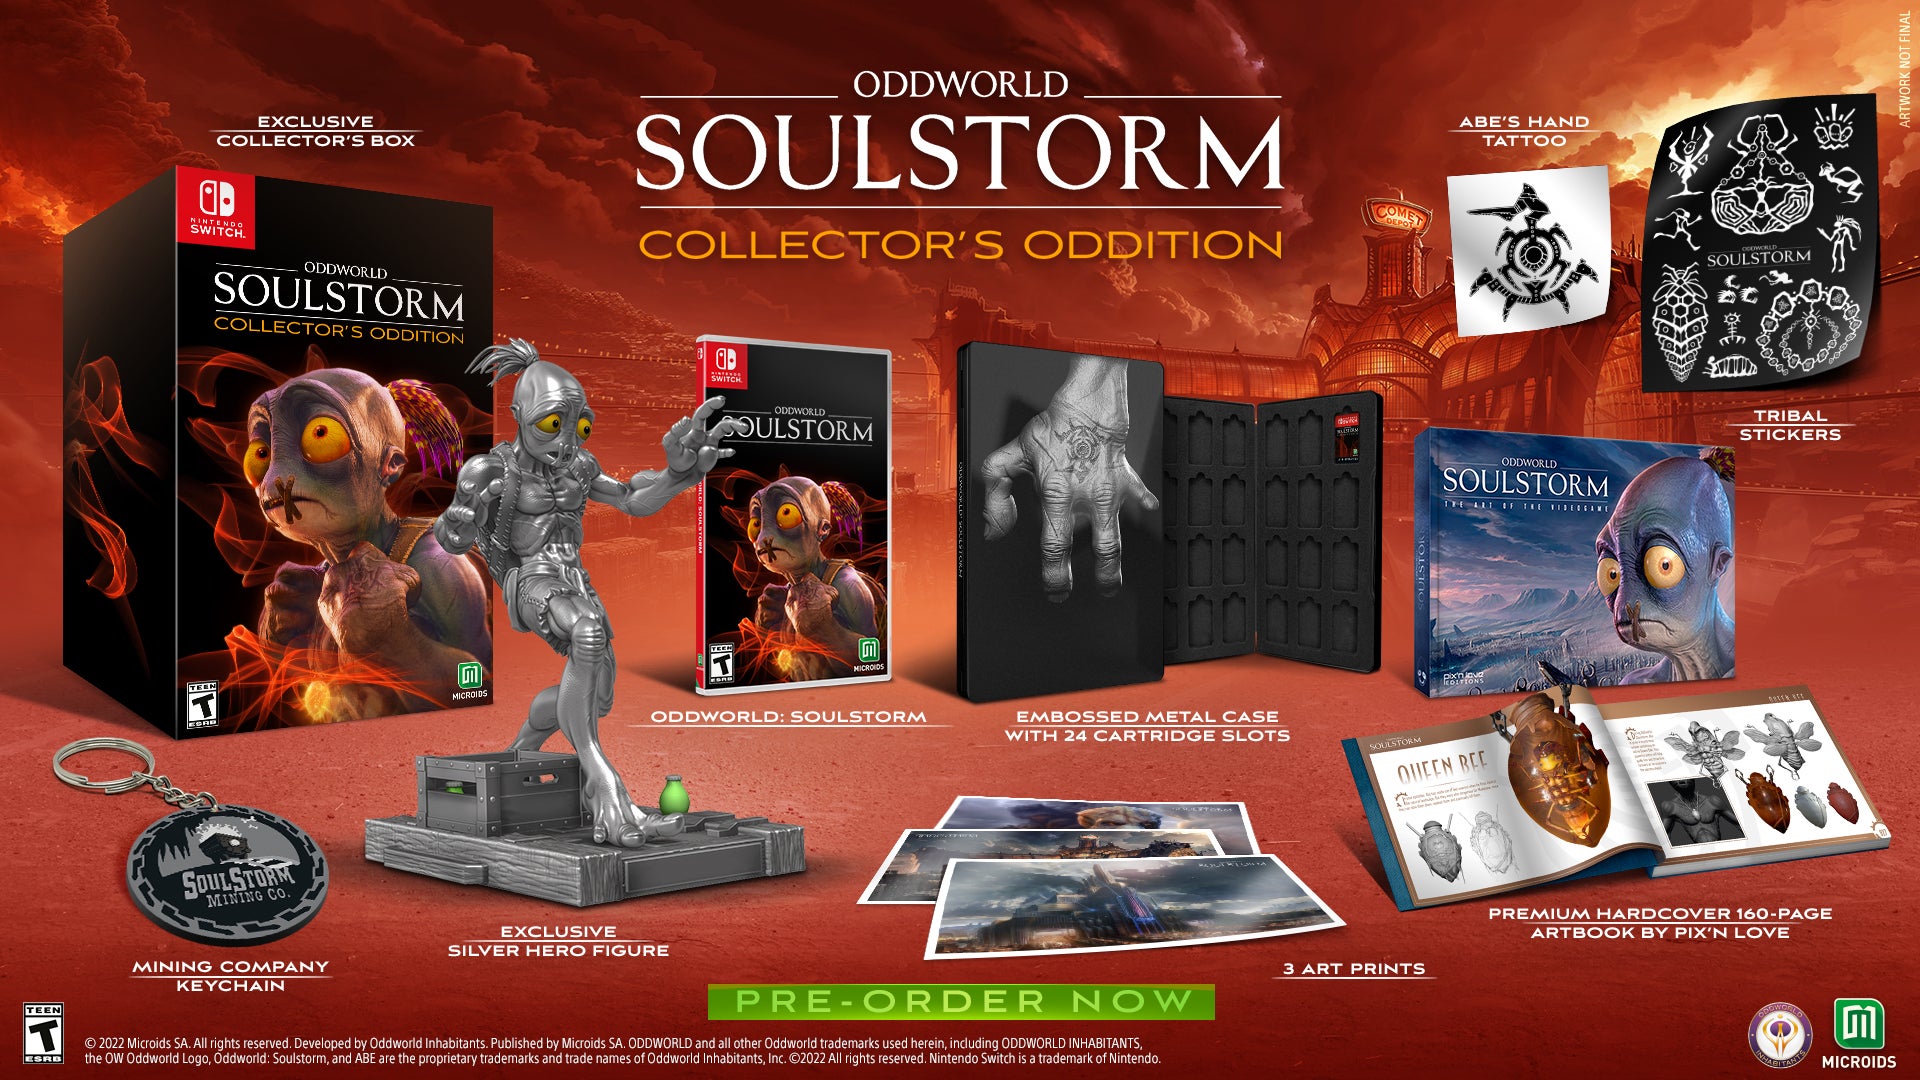 An image of the contents of Oddworld: Soulstorm Collector's Oddition.